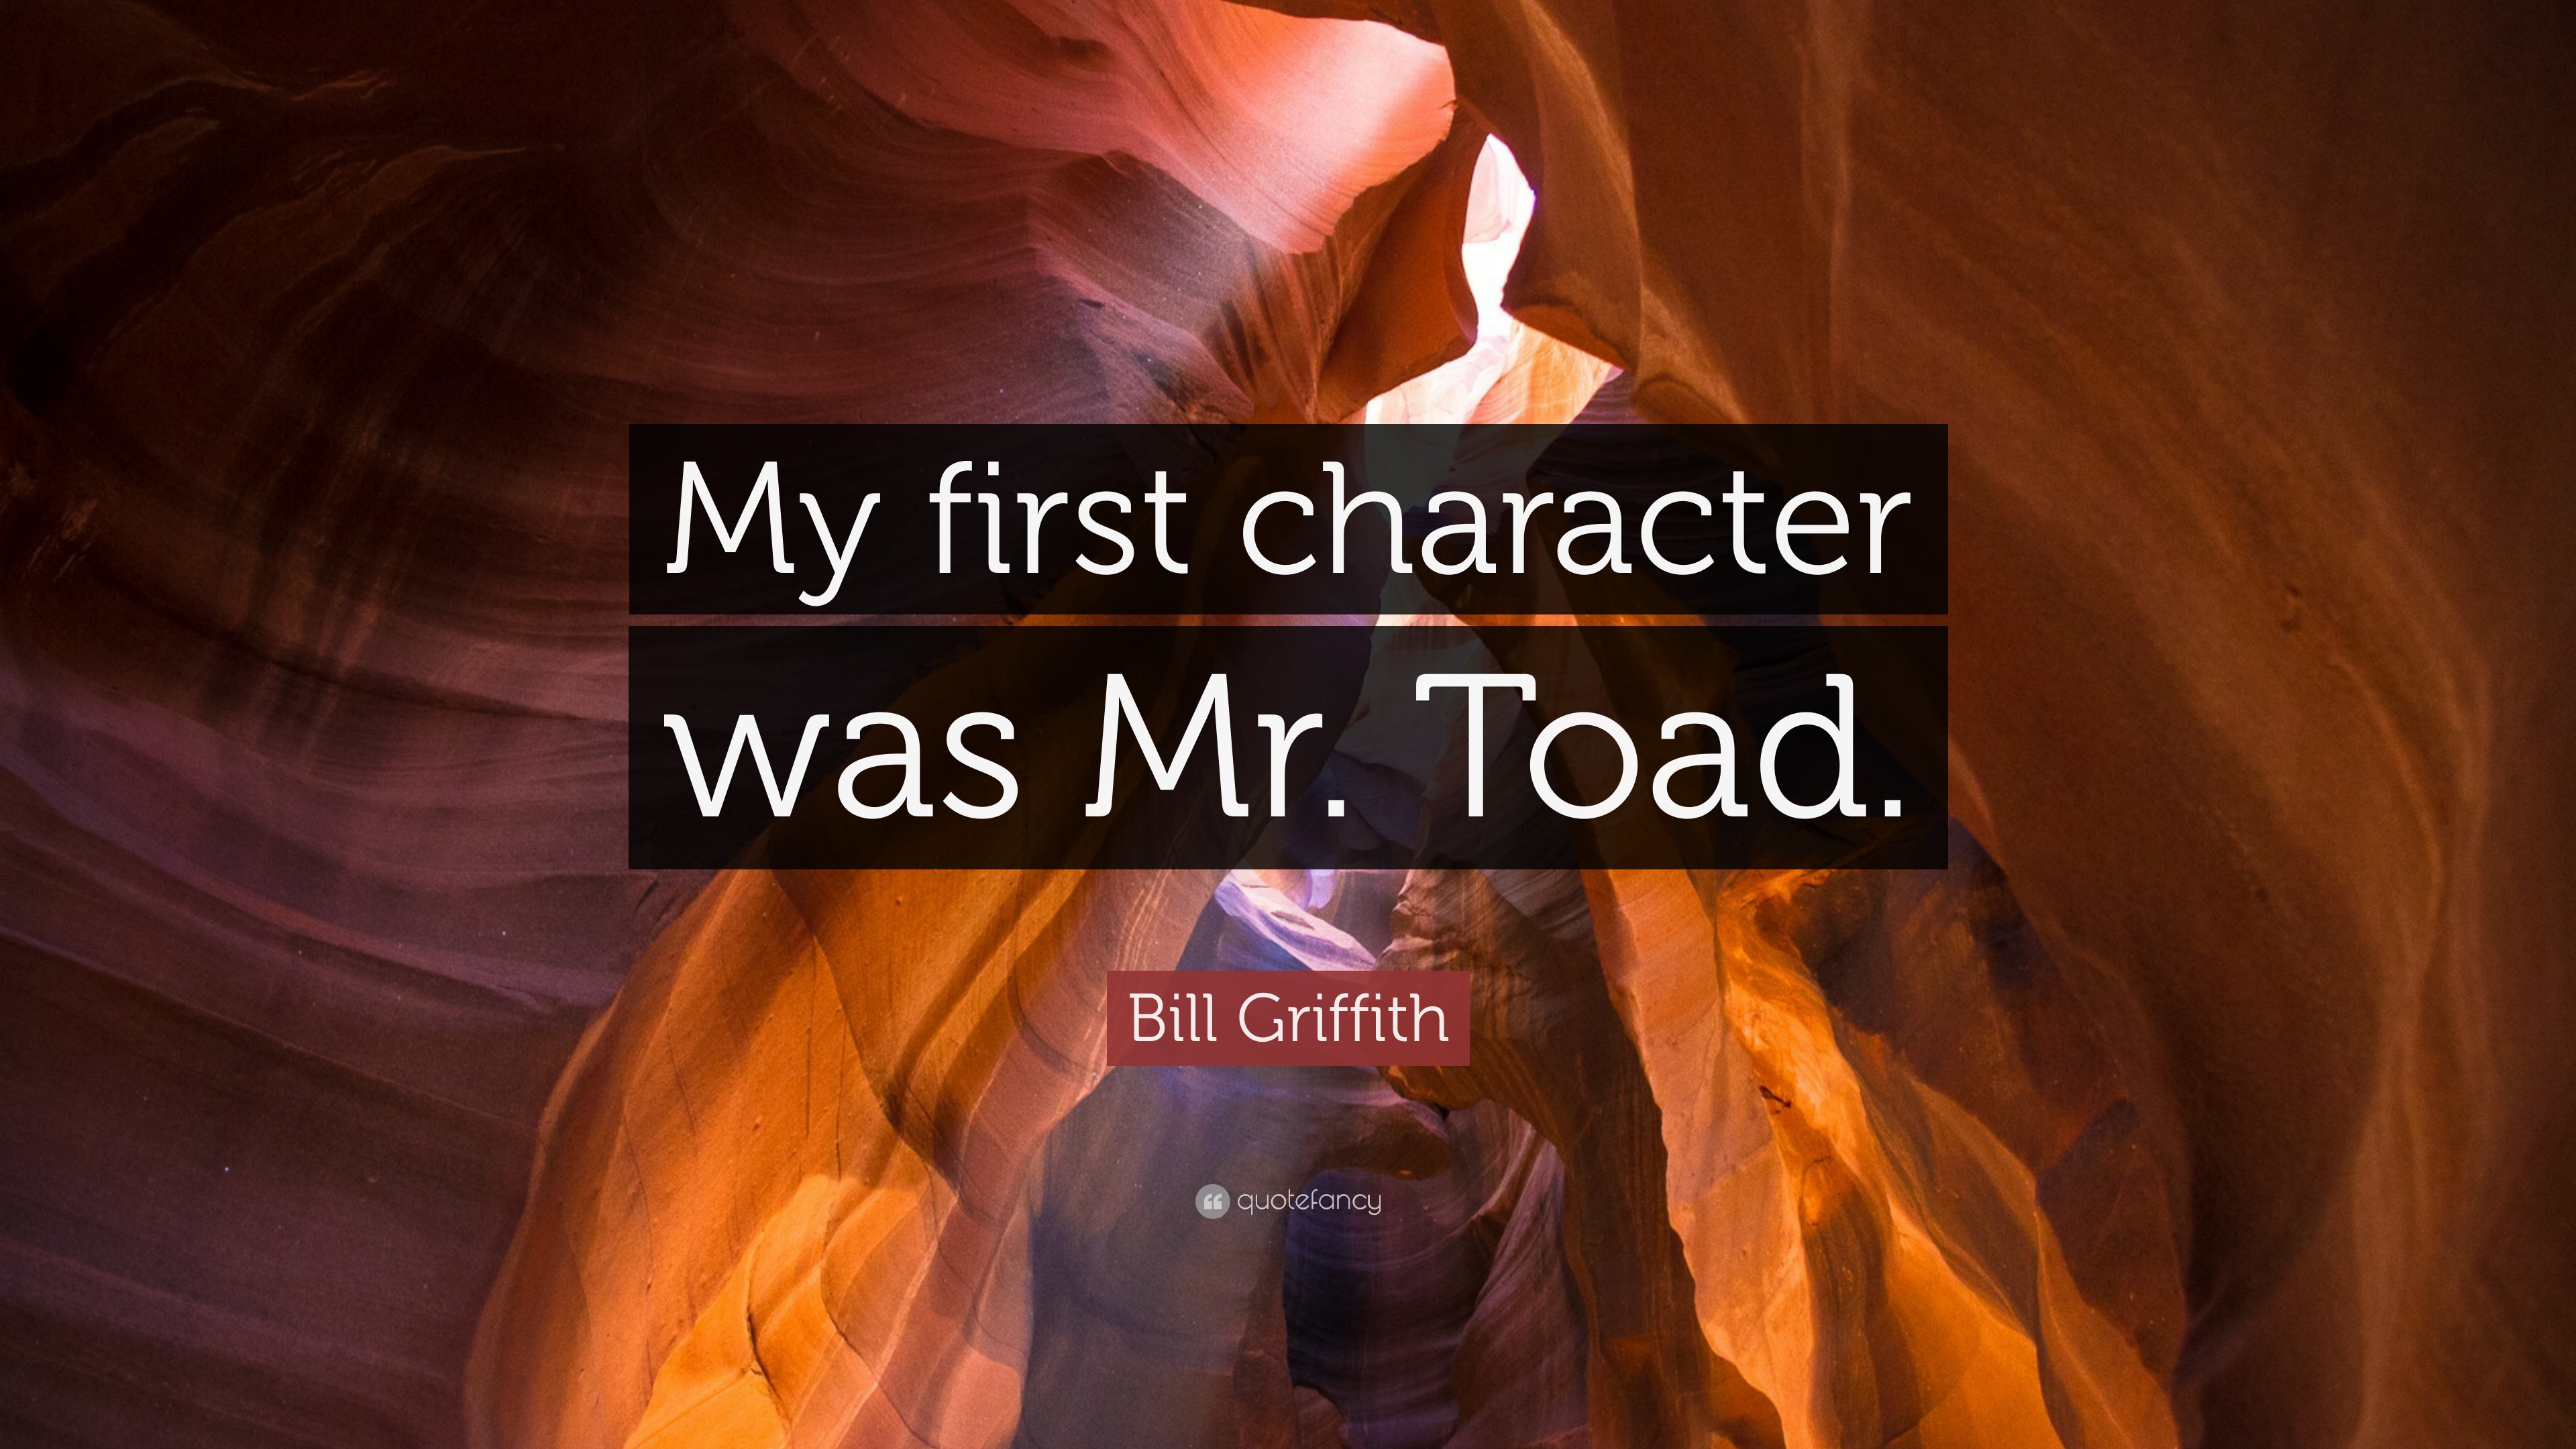 Bill Griffith Quote: “My first character was Mr. Toad.” 7